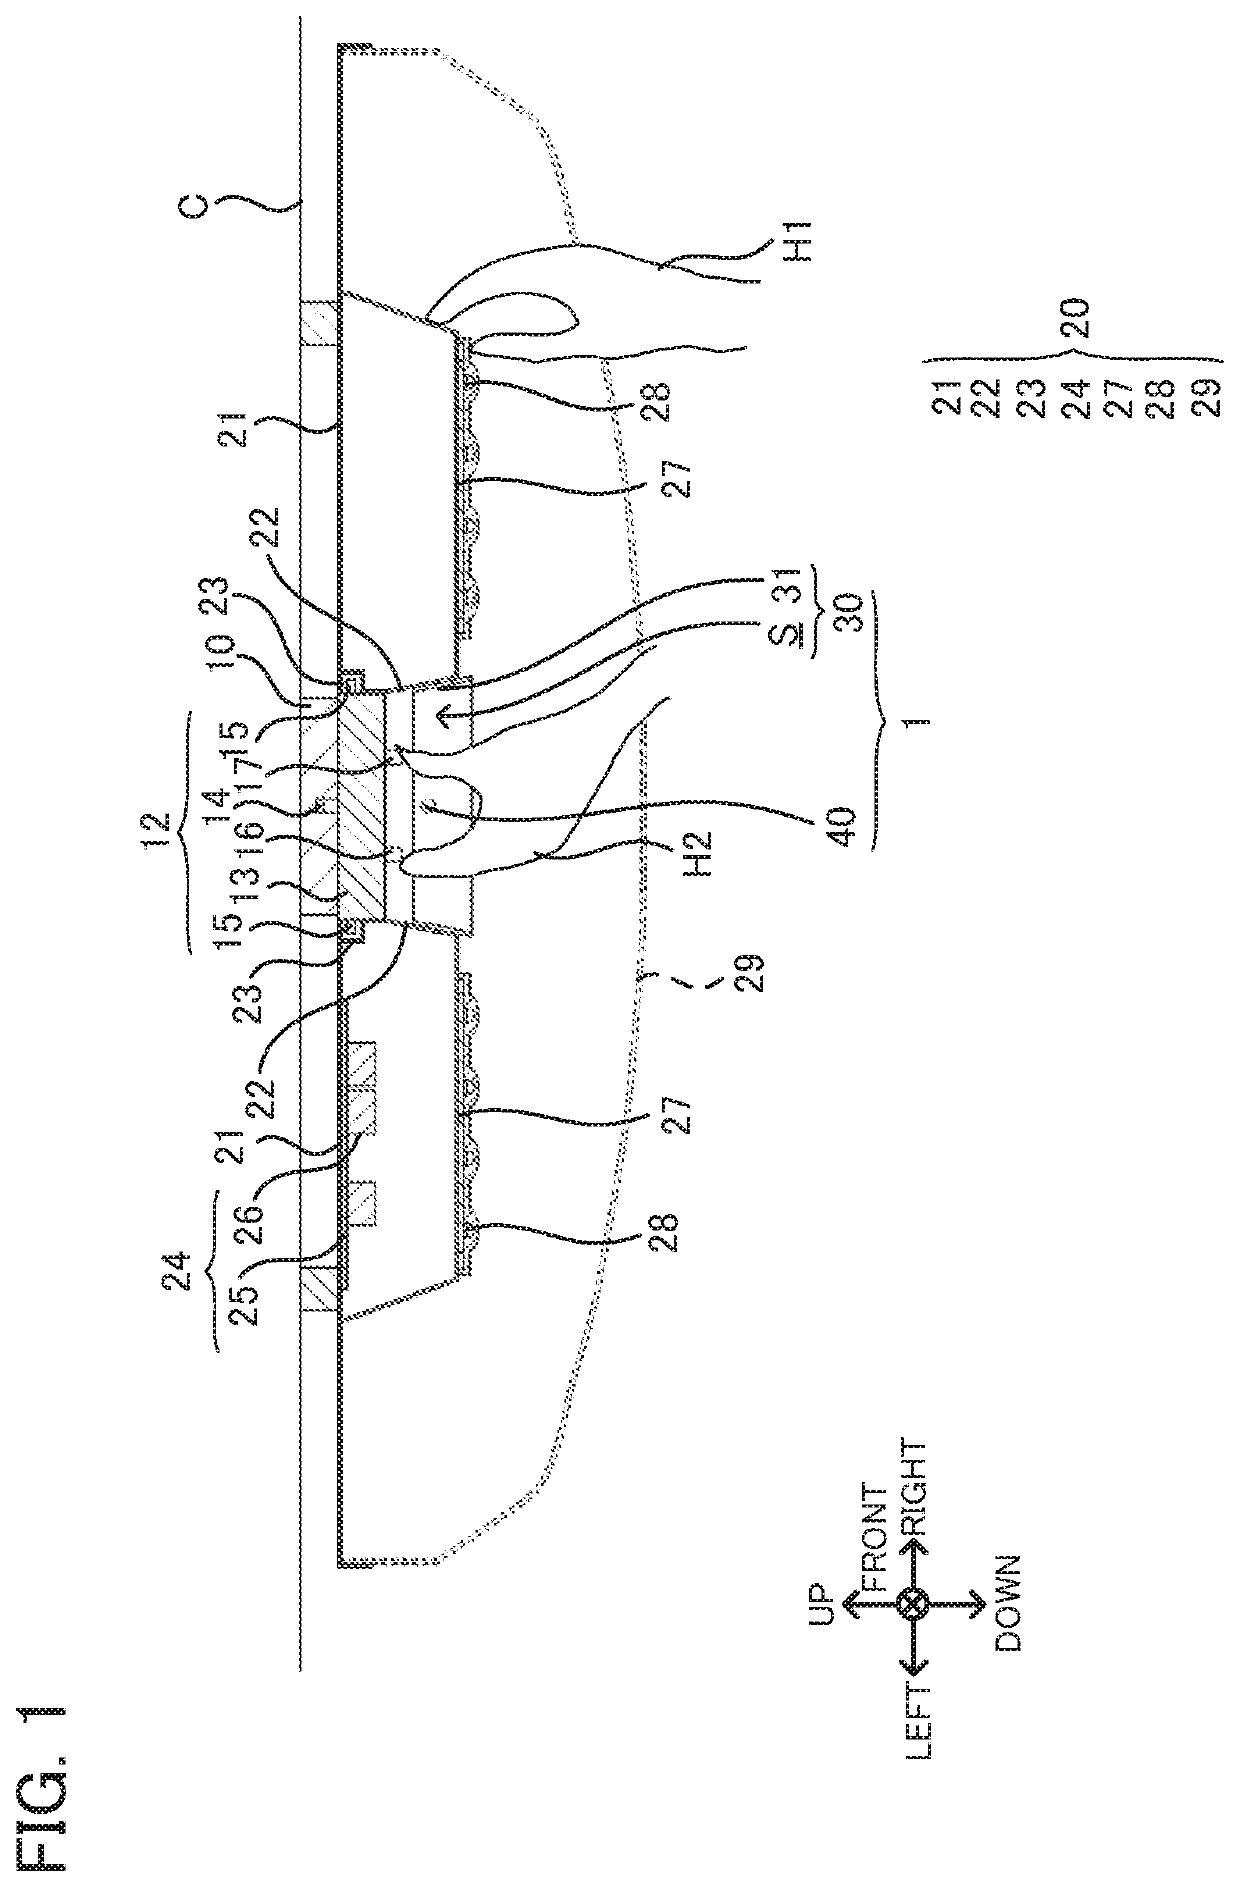 Ceiling-mounted device support, ceiling-mounted device, and method for removing ceiling-mounted device